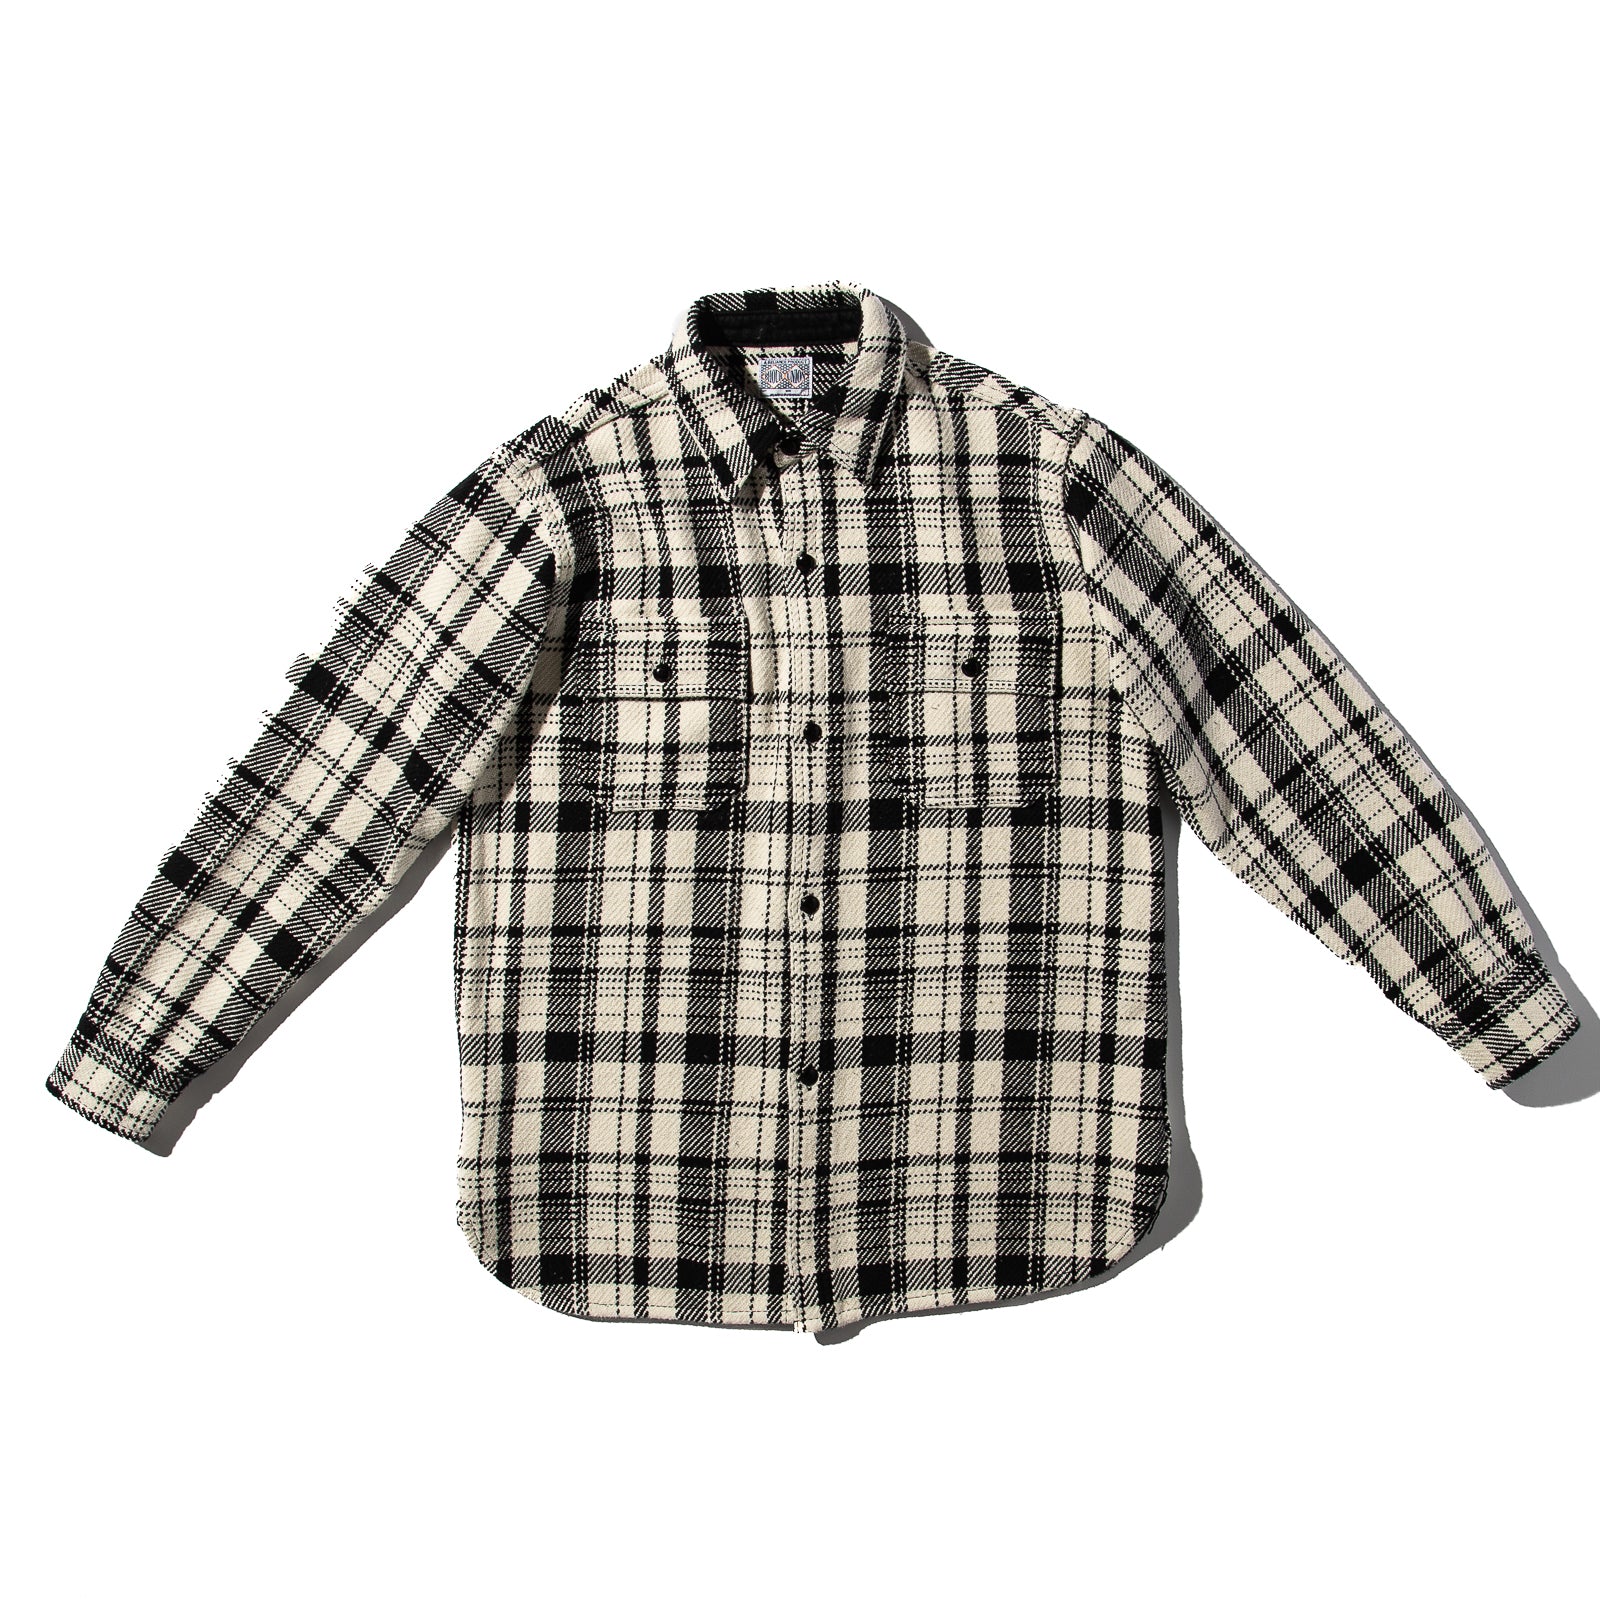 The Real McCoy's 8HU Napped Flannel Shirt / Tongass Plaid - Red